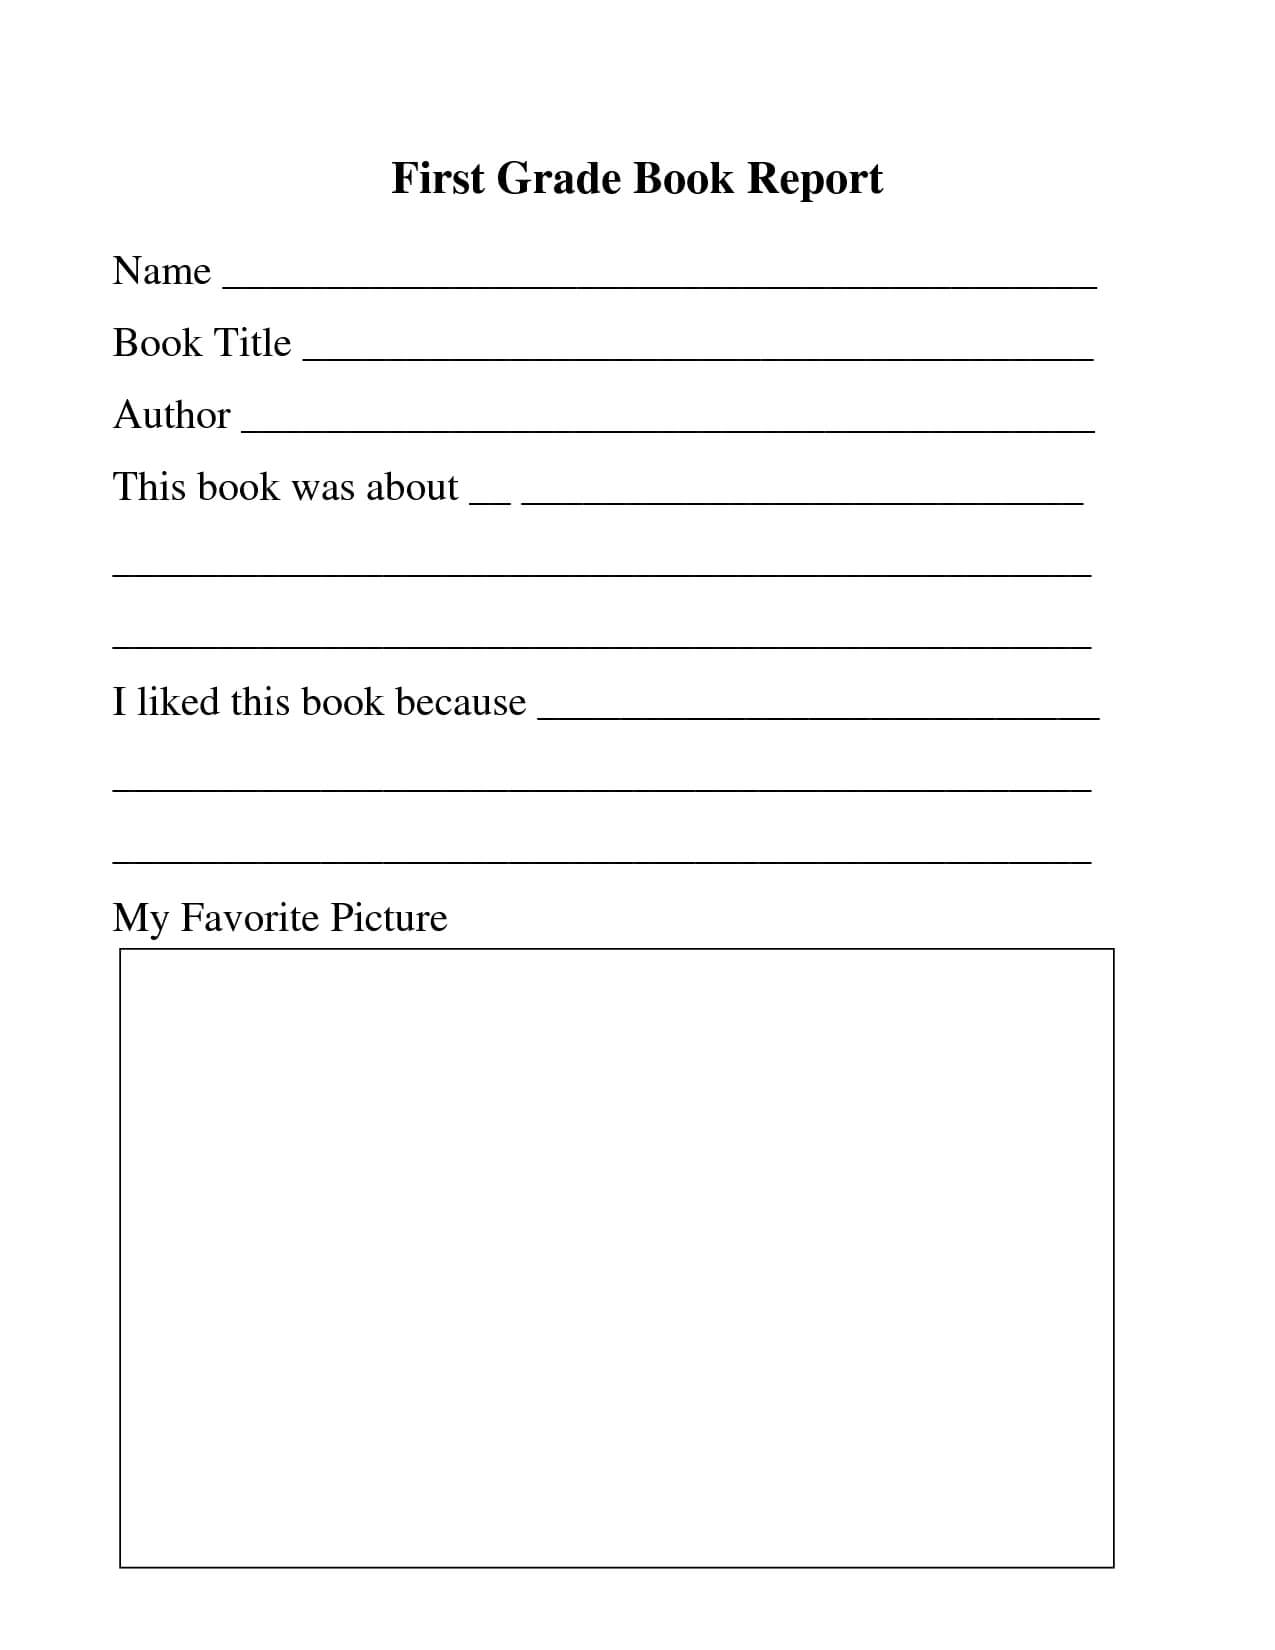 28 Images Of Template For First Grade List | Masorler Pertaining To First Grade Book Report Template